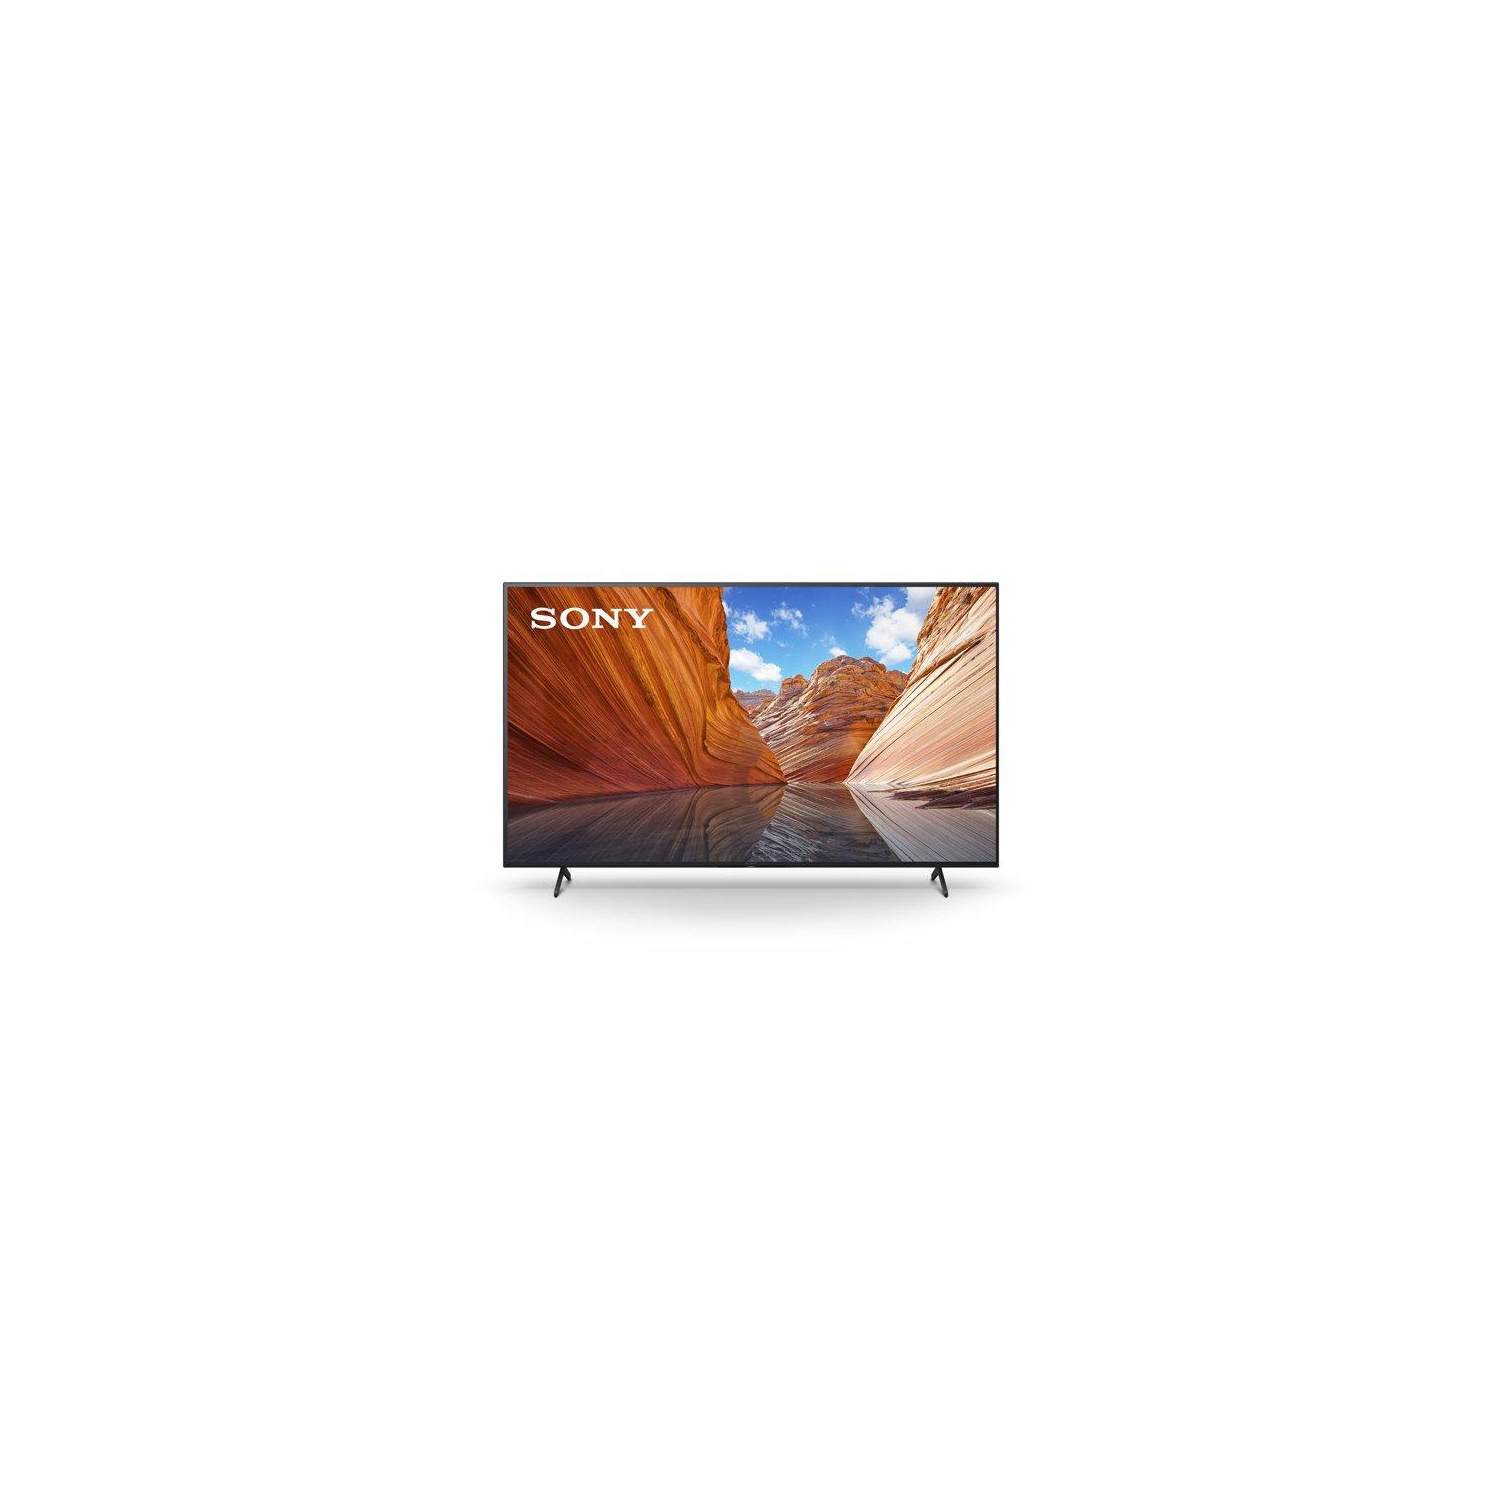 Refurbished (Good) - Sony 65" Class 4K Ultra HD LED Smart Google TV with Dolby Vision HDR X80J Series (KD65X80J)